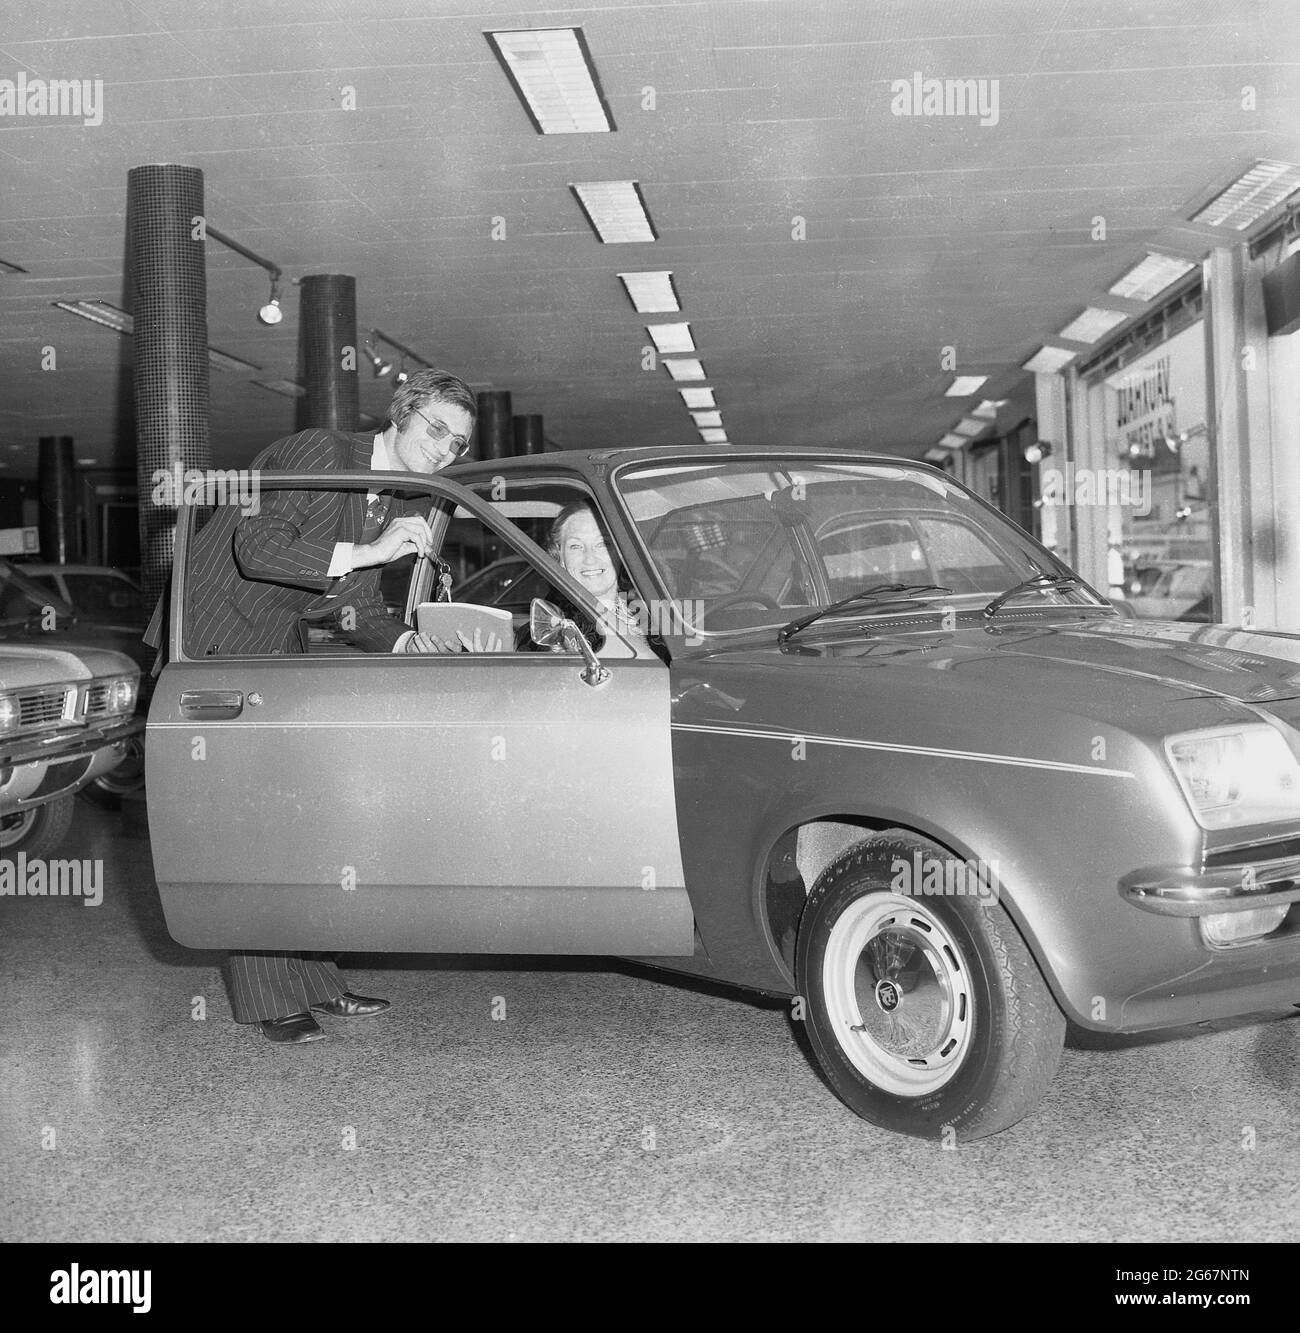 1975, historical, inside a car showroom, a salesman in a pin-stripe suit holding the keys and logbook of a new motorcar, a Vauxhall Chevette, with a lady customer -the new owner - sitting in the driver's seat, England, UK. A small family car, the Chevette was manufactured by Vauxhall motors in the UK between 1975 to 1984. With a design based on the Opel Kadett, the Chevette was one of the first British-built hatchbacks and from 1975 to 1978, it was the UK's best-selling model in that class. Stock Photo